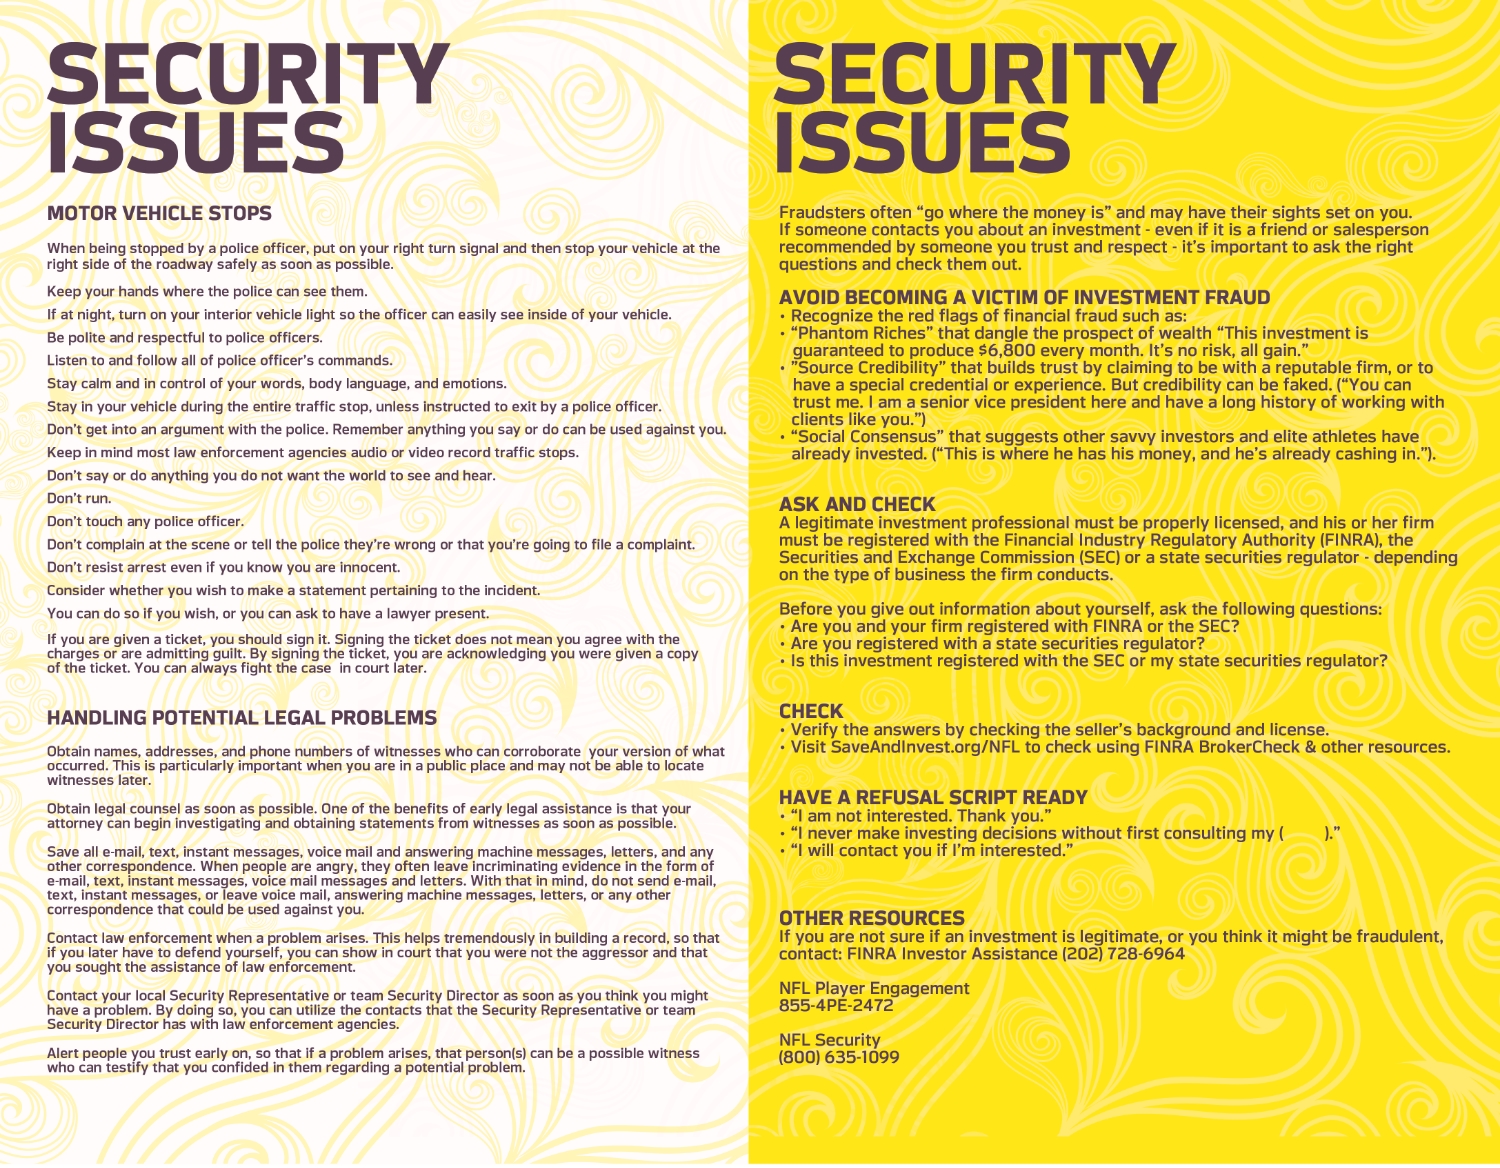 SECURITY ISSUES pages 3 and 4.jpg